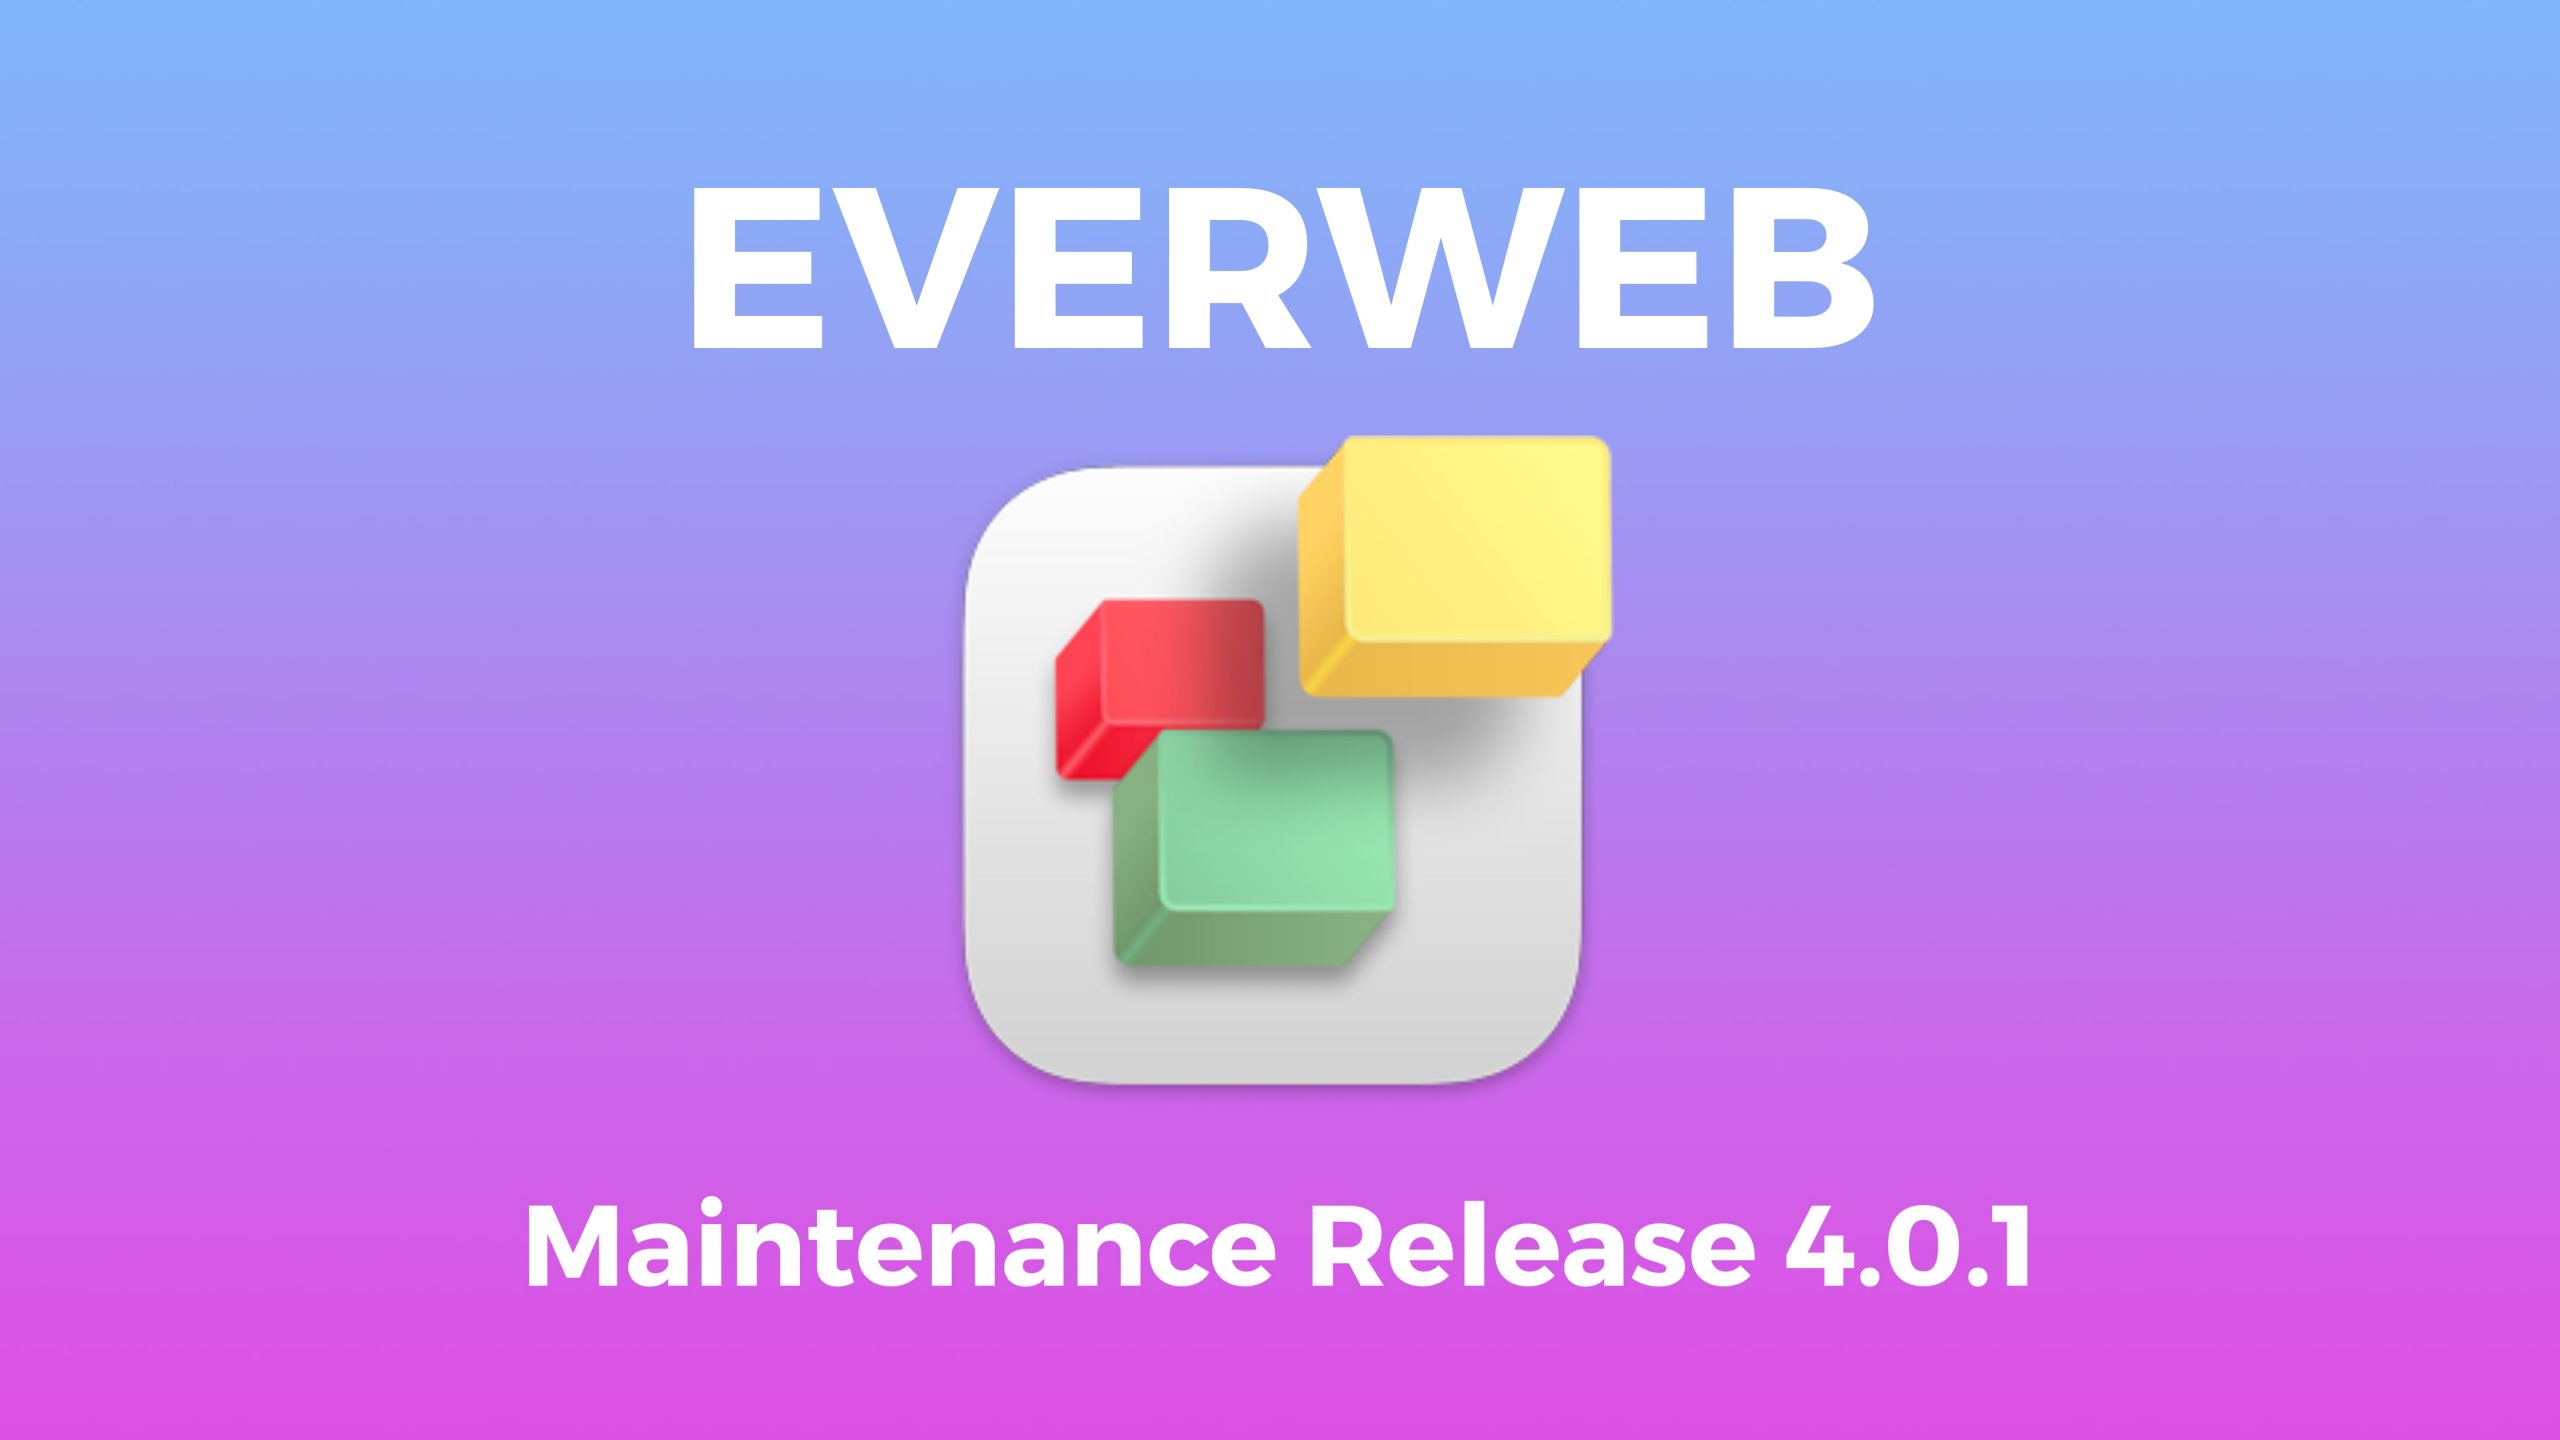 EverWeb 4.0.1 Maintenance Release is now available for Windows and Mac! Download Your Update Today!